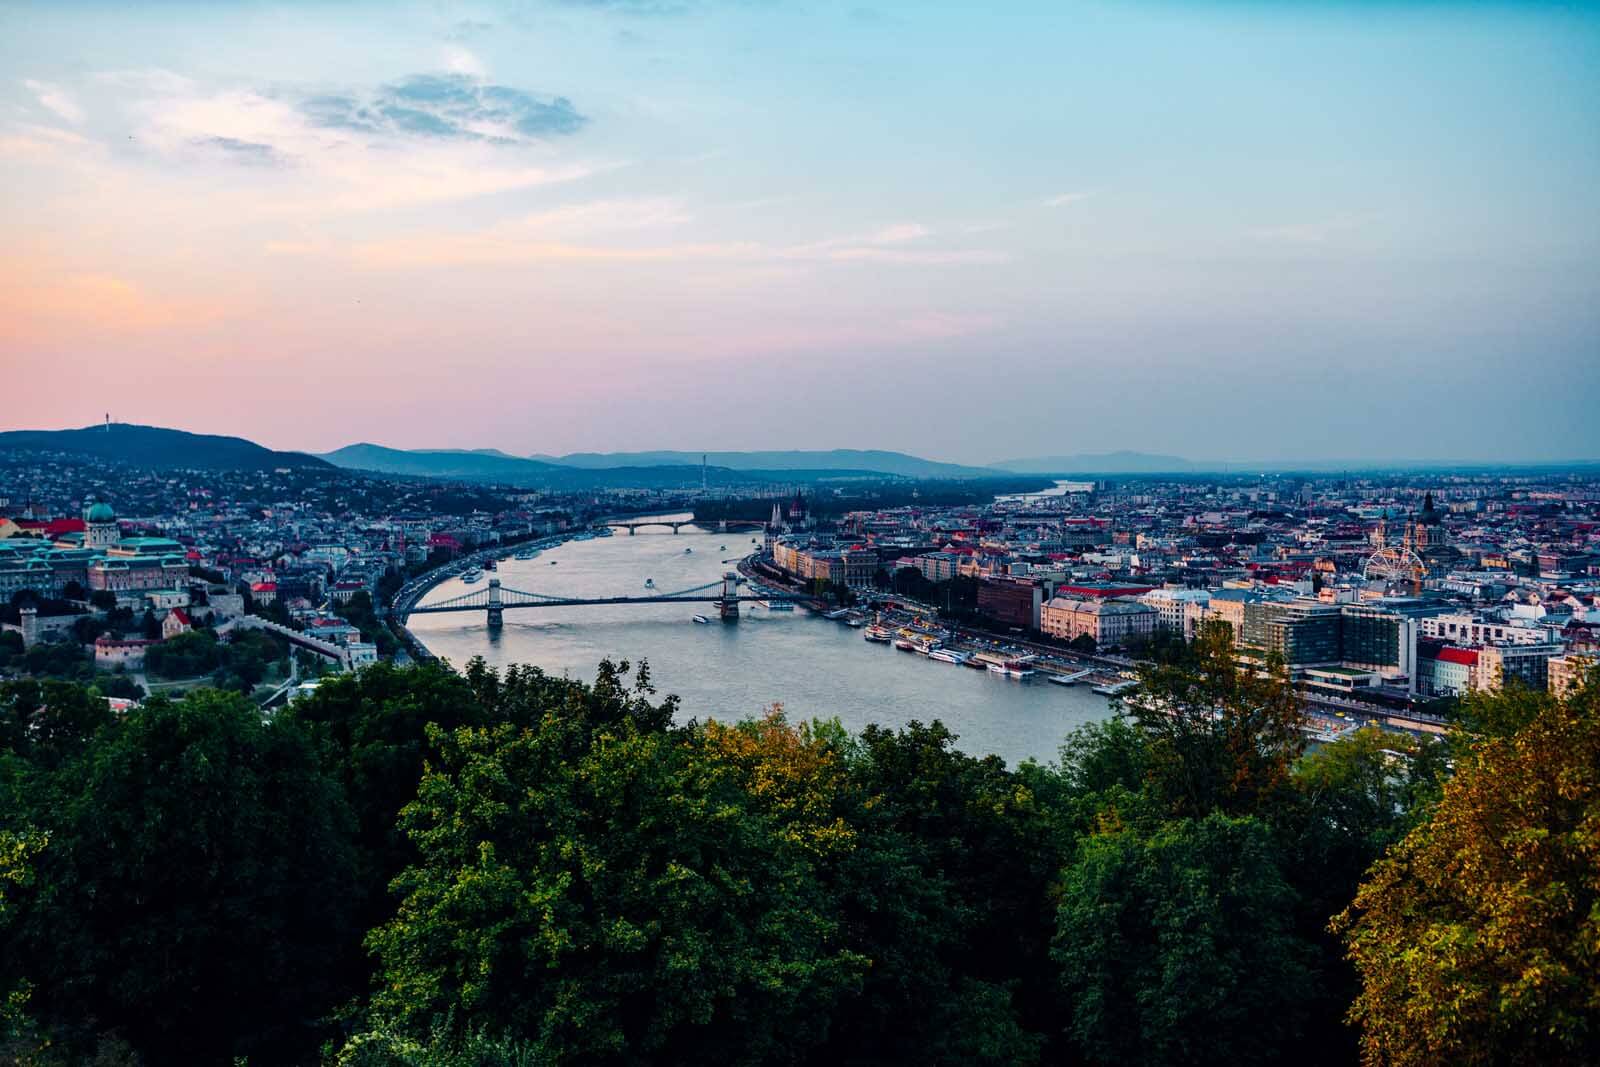 View of Budapest from the Citadella viewpoint